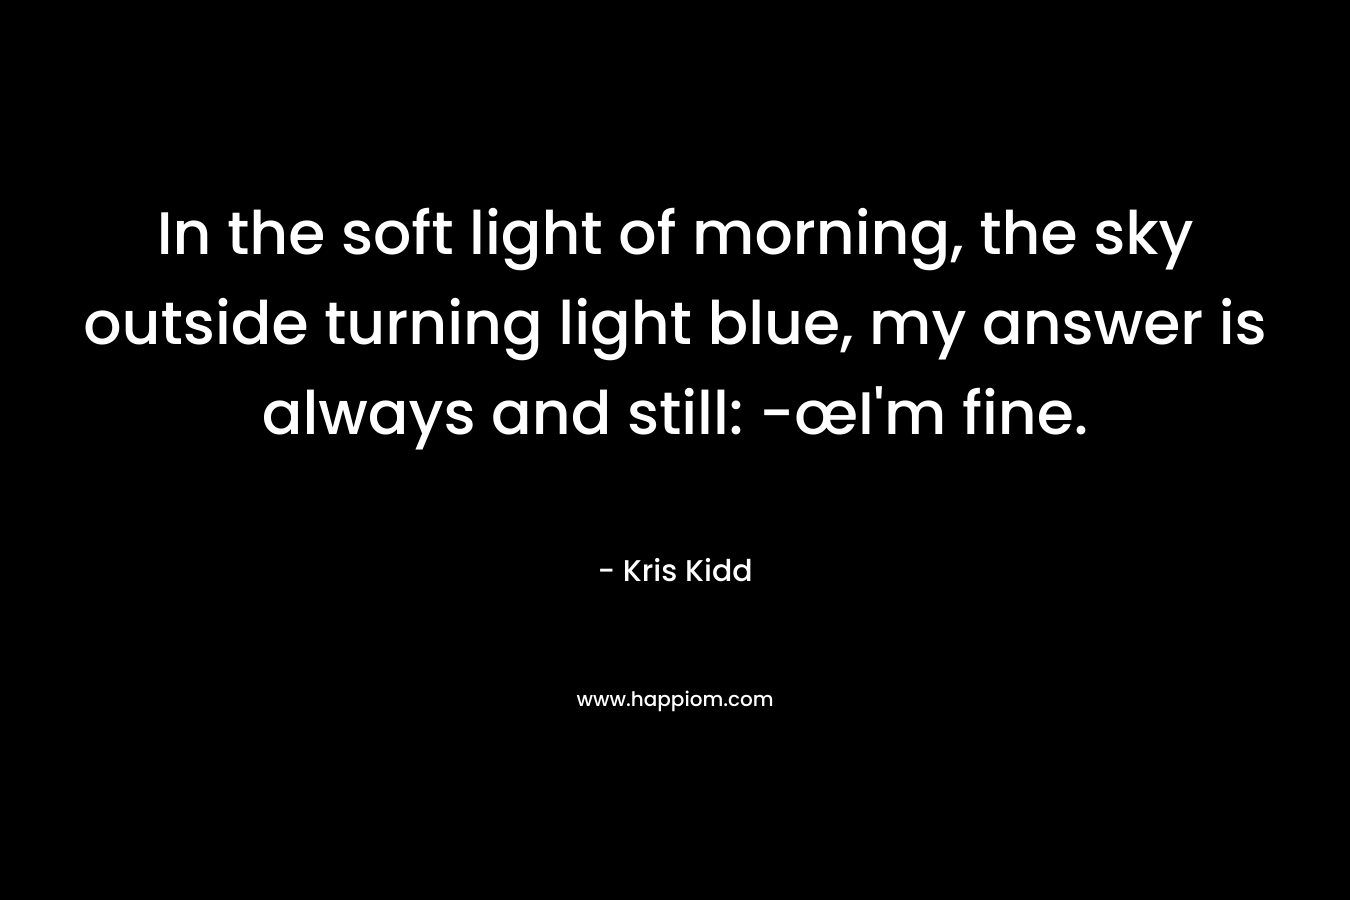 In the soft light of morning, the sky outside turning light blue, my answer is always and still: -œI’m fine. – Kris Kidd